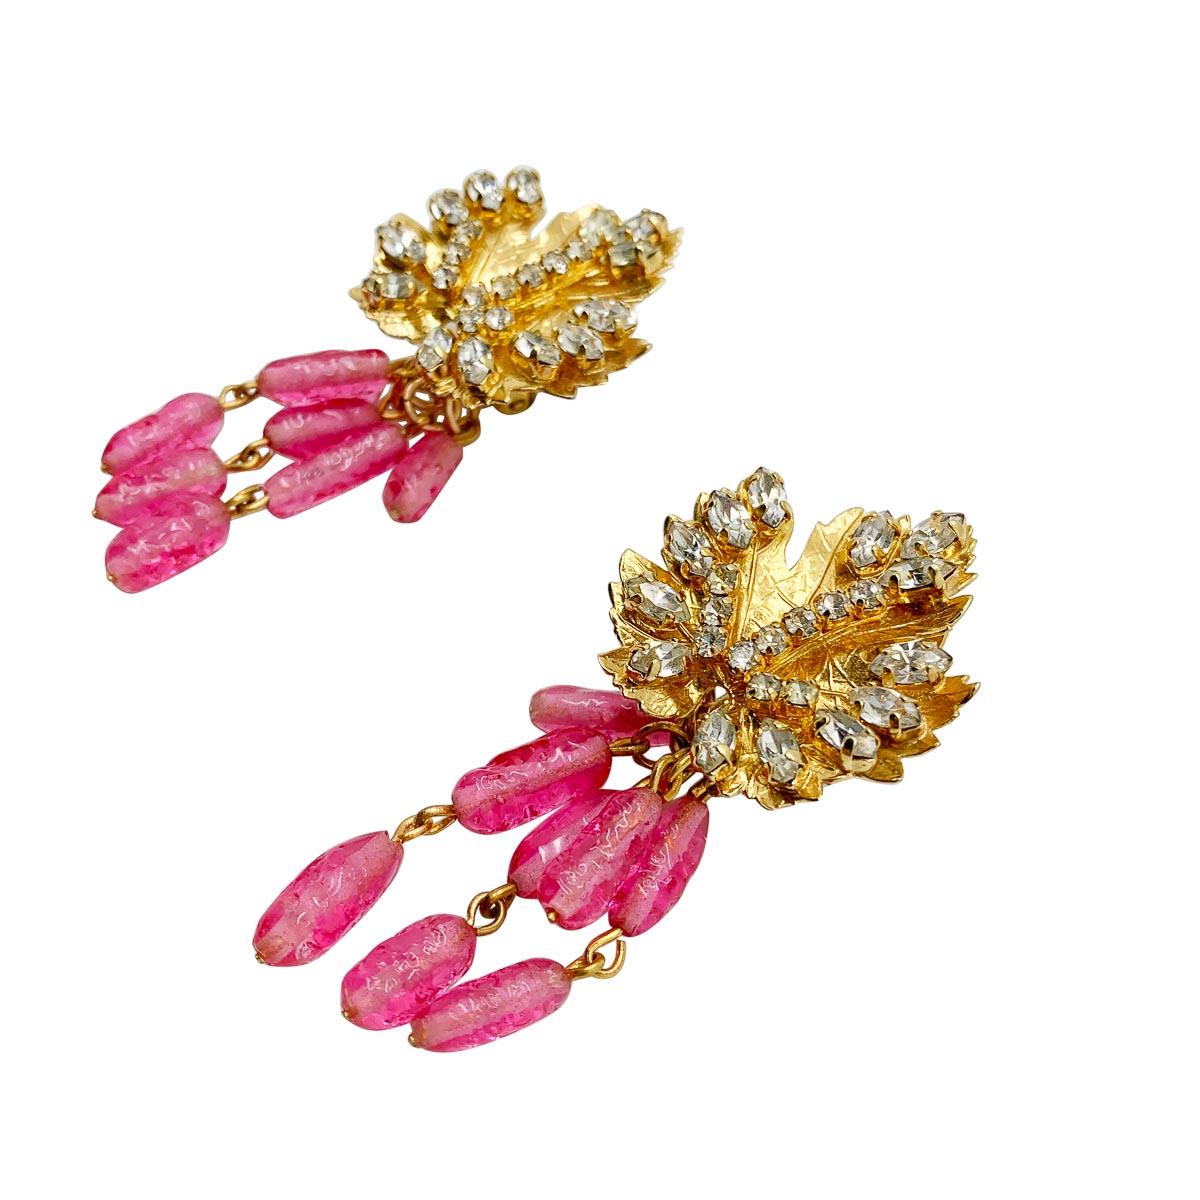 An outstanding pair of vintage Dior Leaf Earrings crafted during the 1970s. Featuring leaf motif tops claw set with white chaton crystals giving way to perfectly pink art glass bead tassels for a grander vibe.
With archive pieces from her own Dior